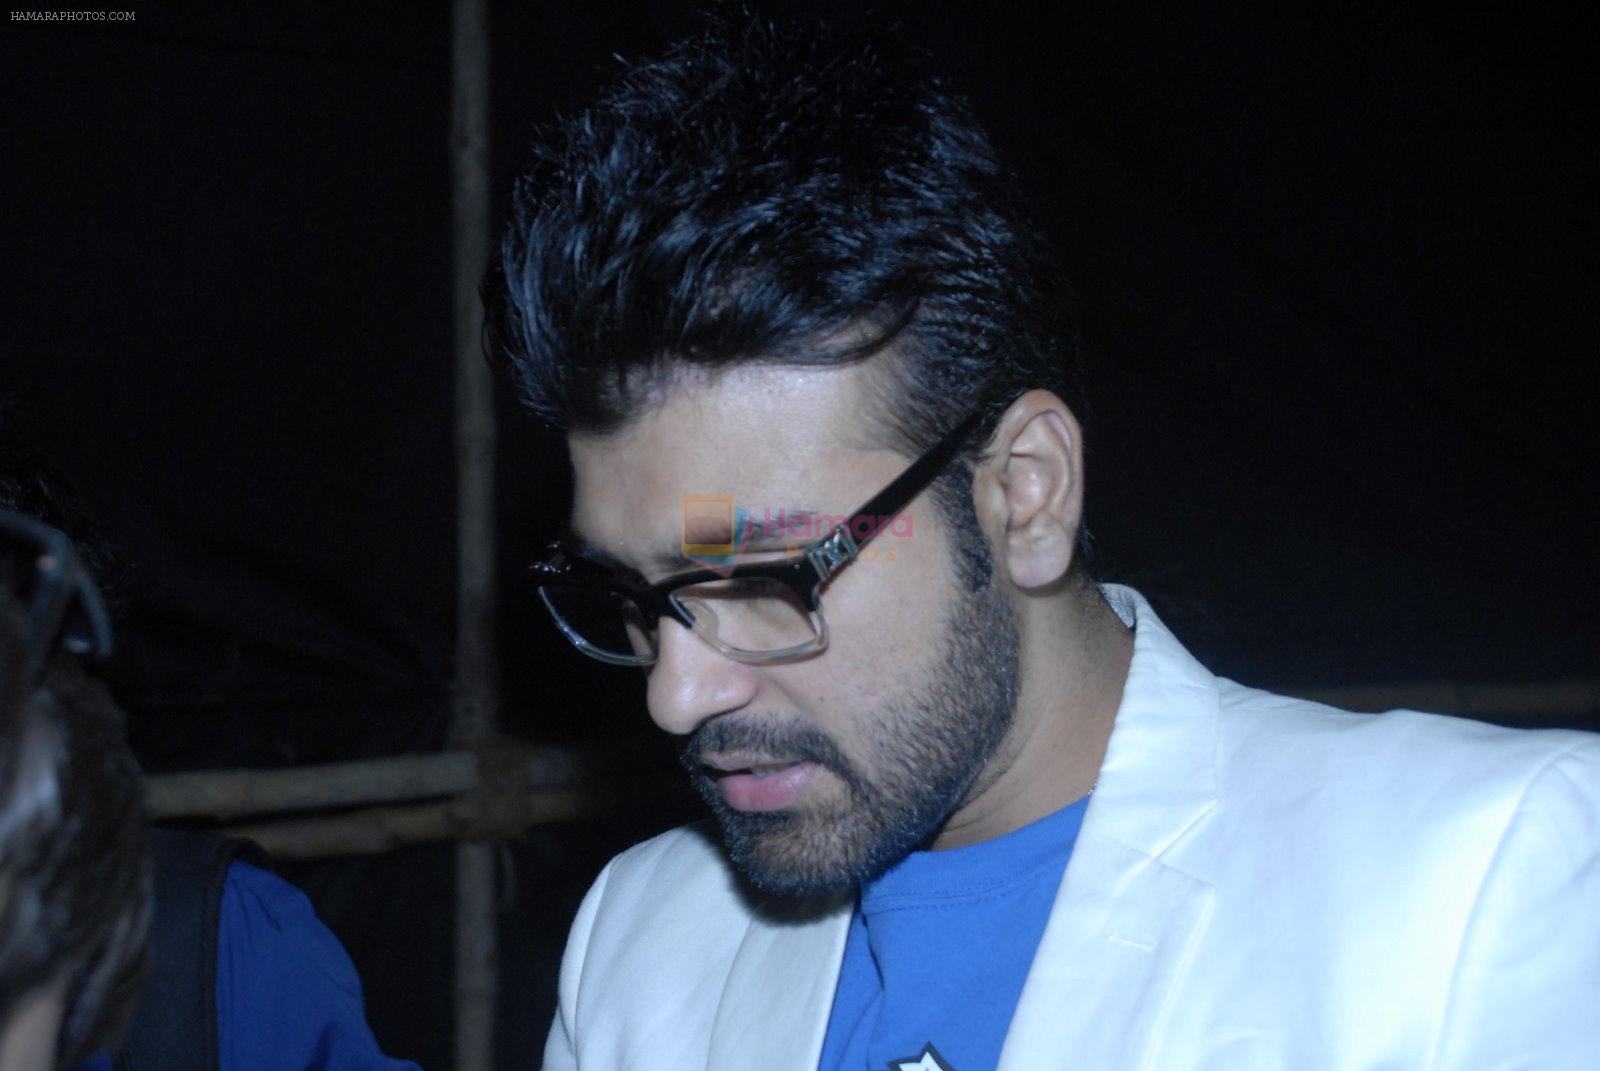 Arya Babbar book launch disrupted by cops in Malad, Mumbai on 8th Dec 2014